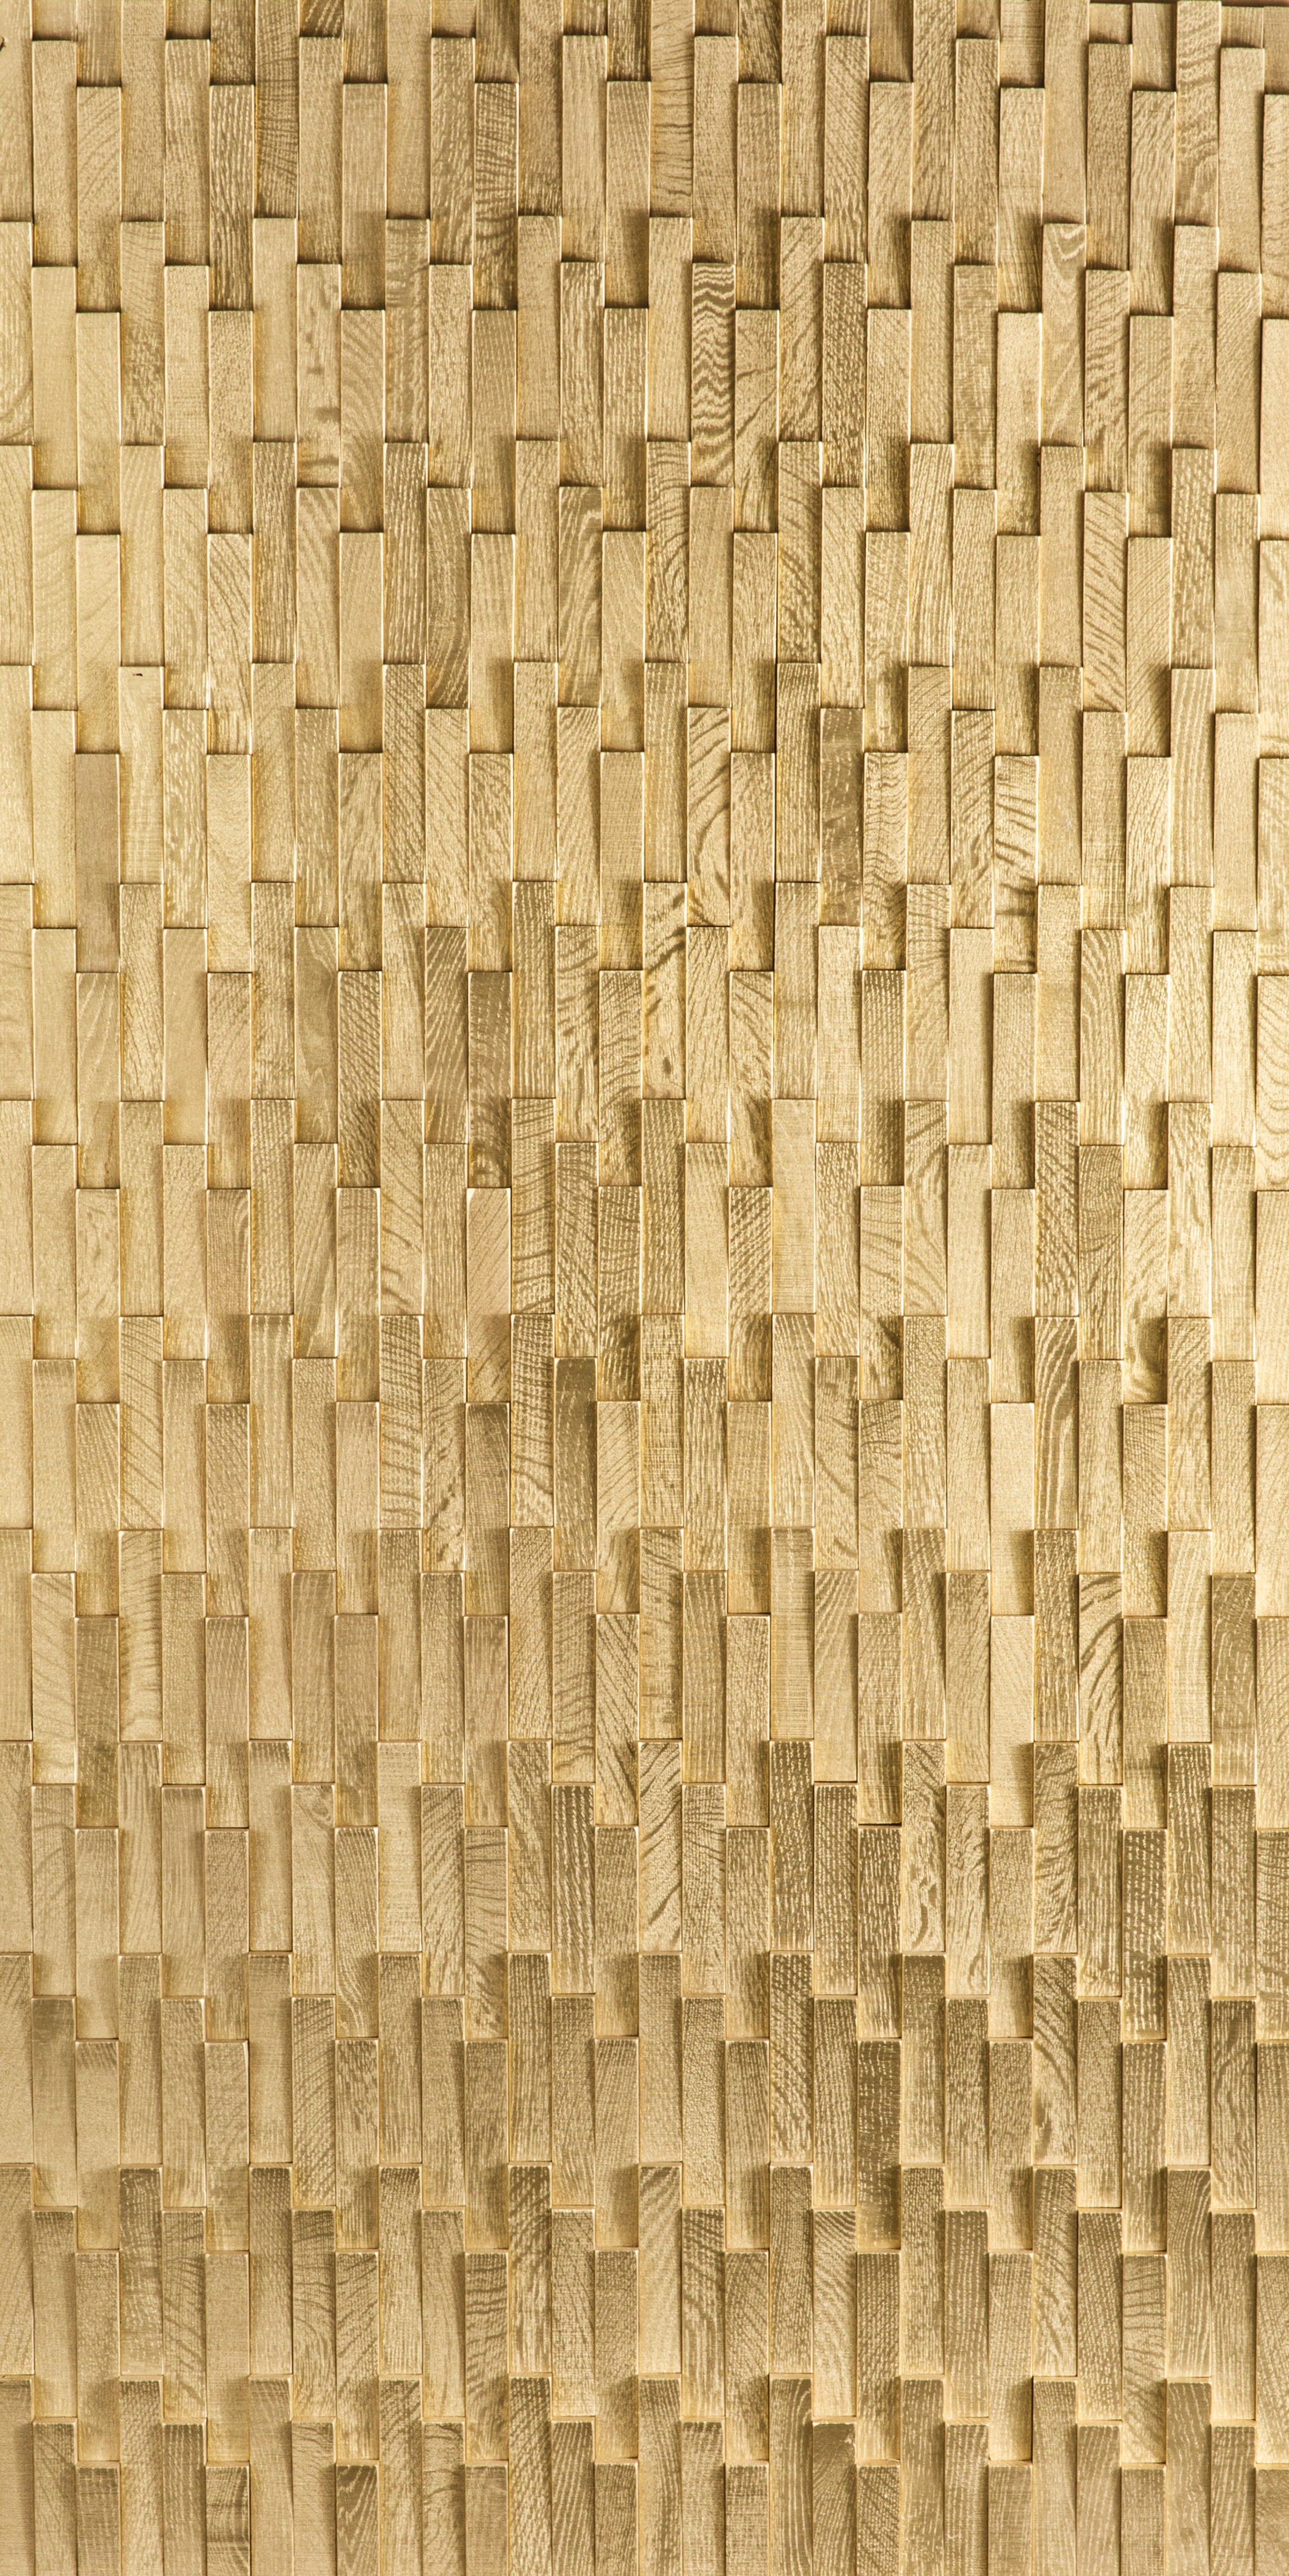 duchateau inceptiv wave gold oak three dimensional wall natural wood panel lacquer for interior use distributed by surface group international